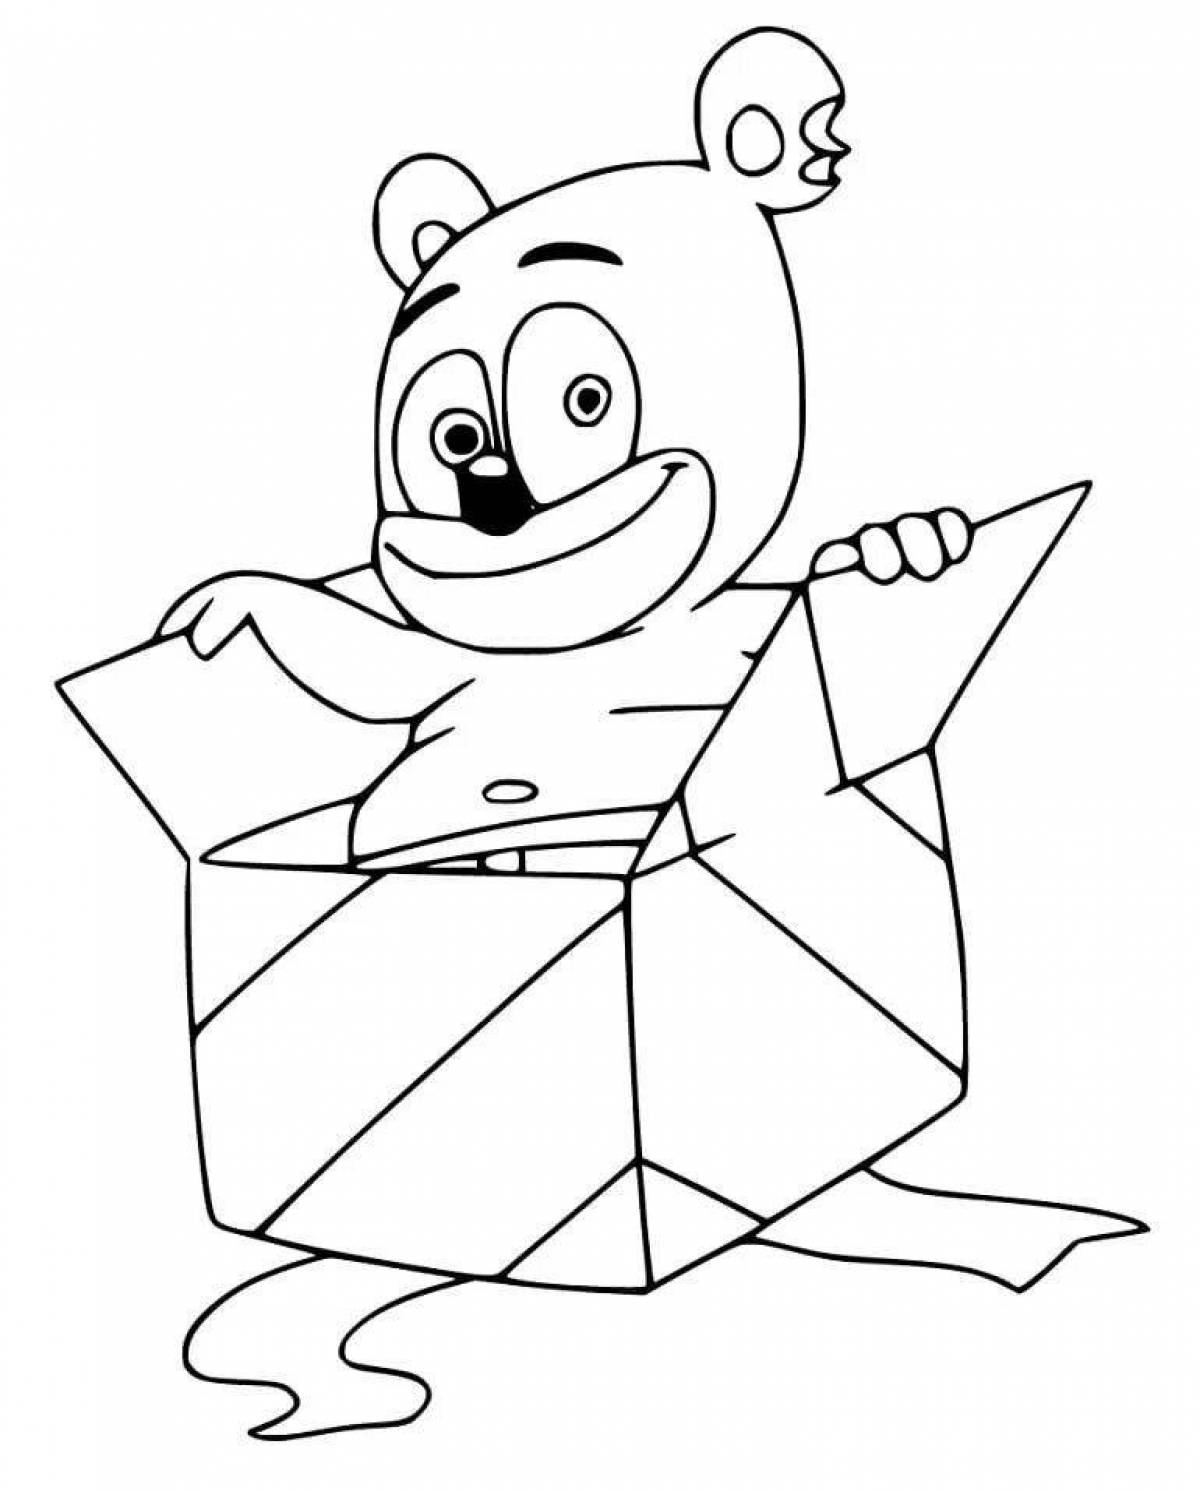 Adorable humber bear coloring page